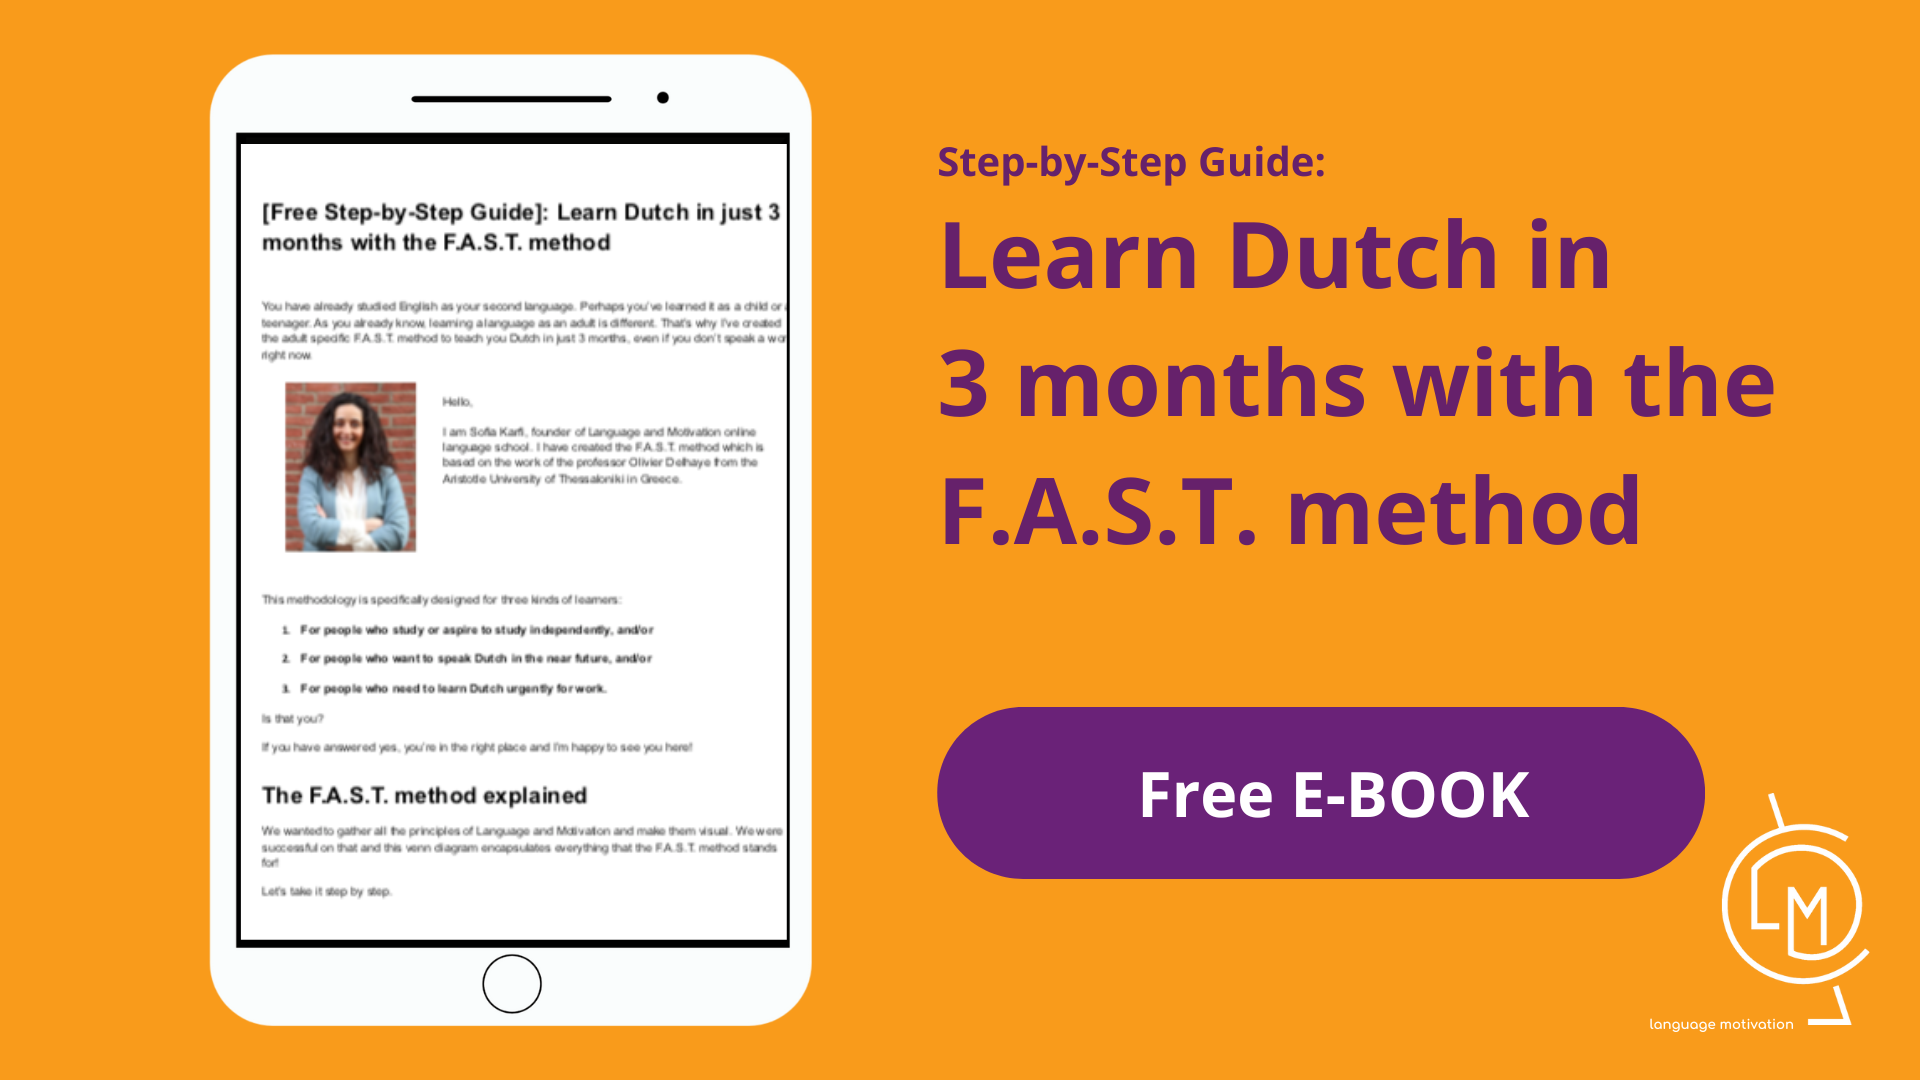 [Free Step-by-Step Guide]: Learn Dutch in just 3 months with the F.A.S.T. method